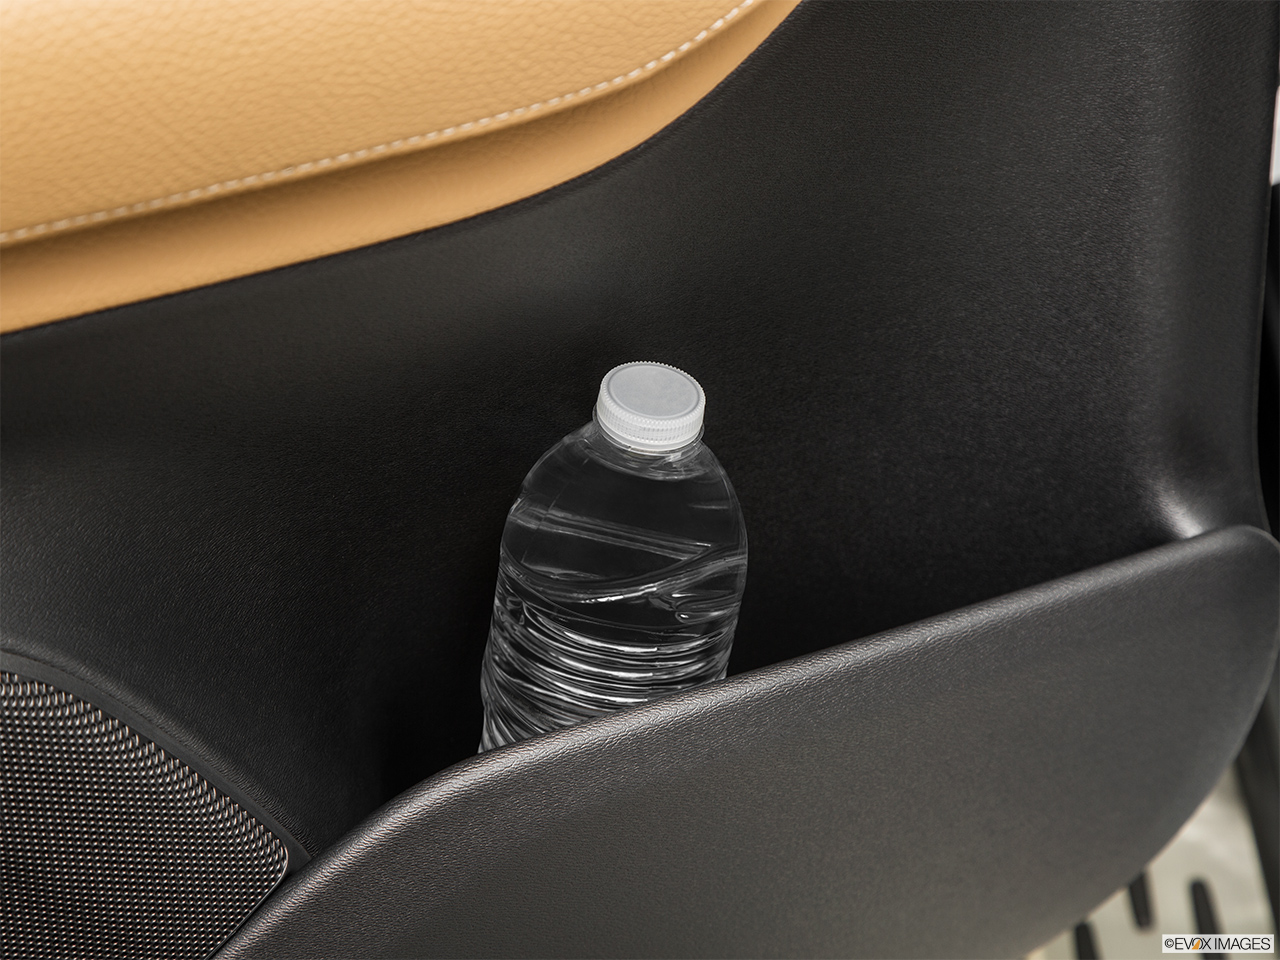 2016 Volvo XC90 T6 AWD Second row side cup holder with coffee prop, or second row door cup holder with water bottle. 